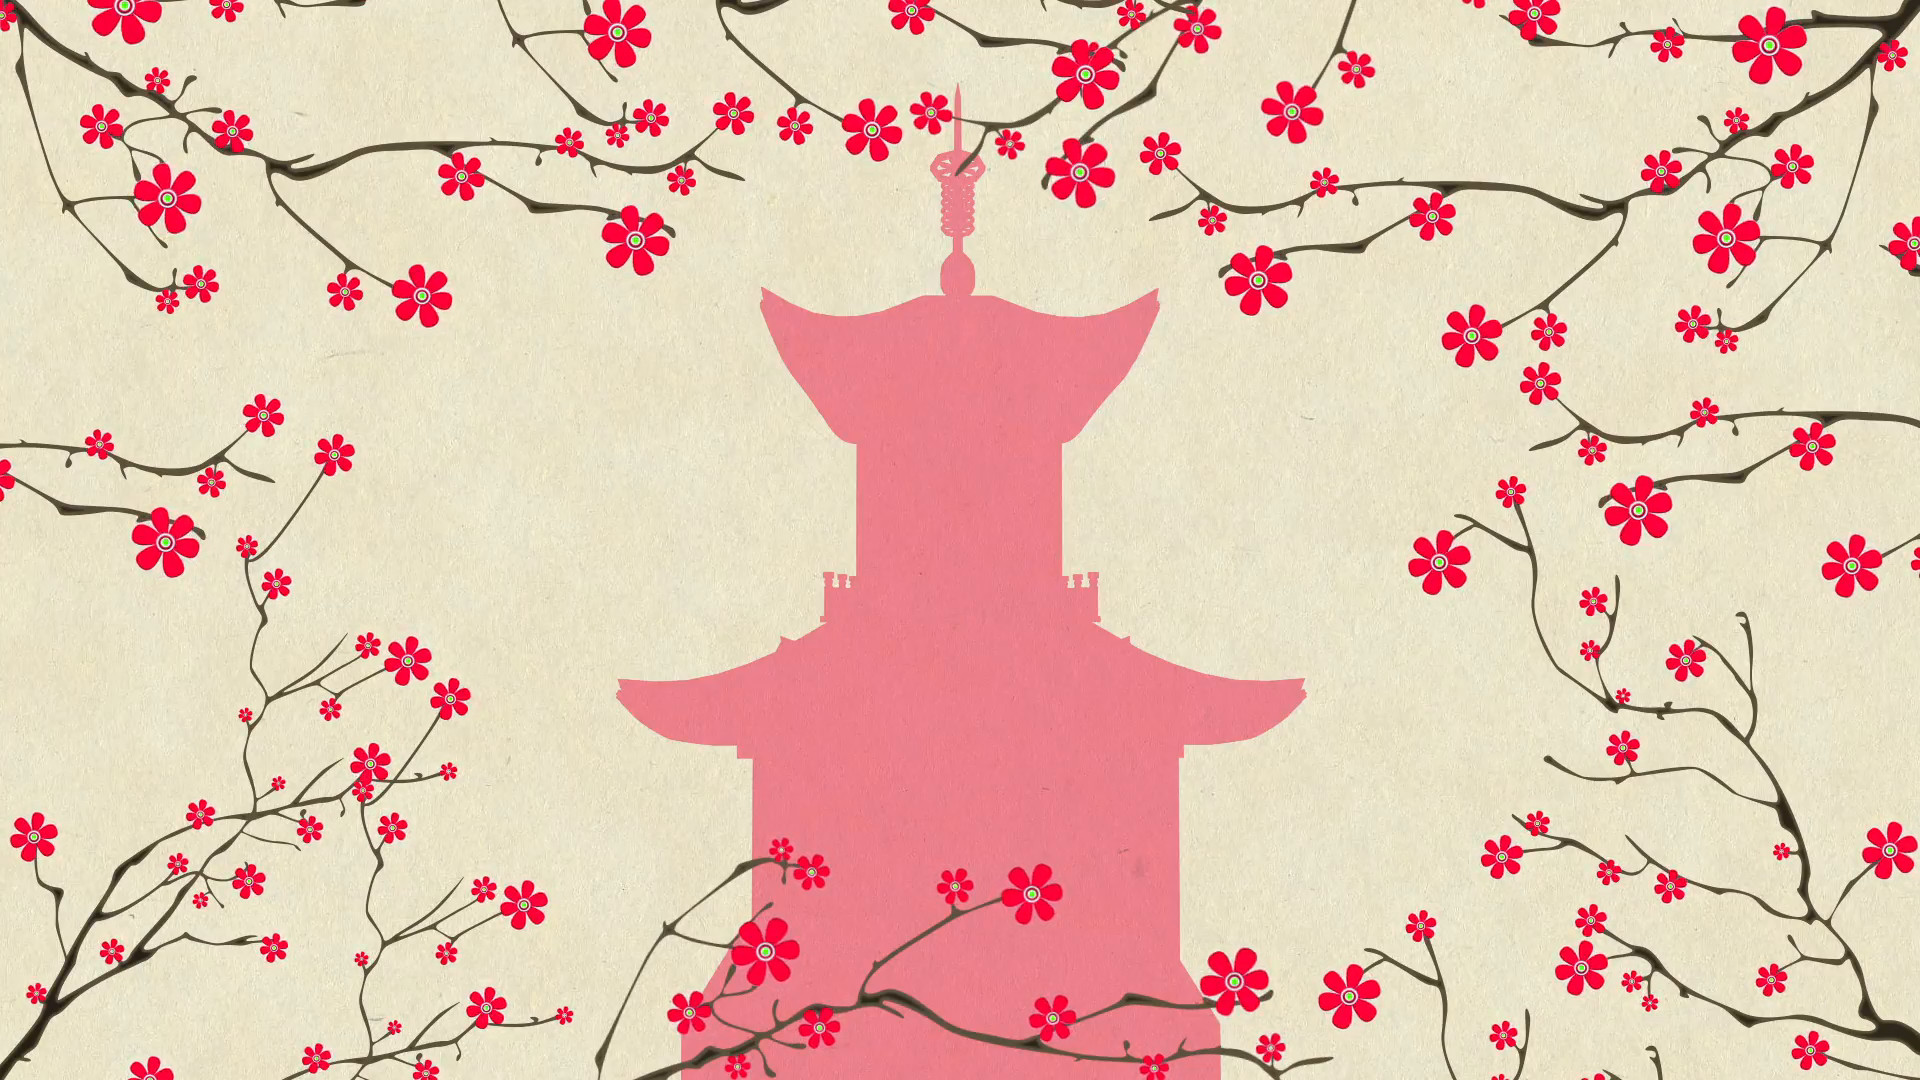 1920x1080 Cherry Blossoming Pagoda 2 Springtime Illustration Rotating Spring Flowers  on Cherry Tree Branches Motion Background - Storyblocks Video